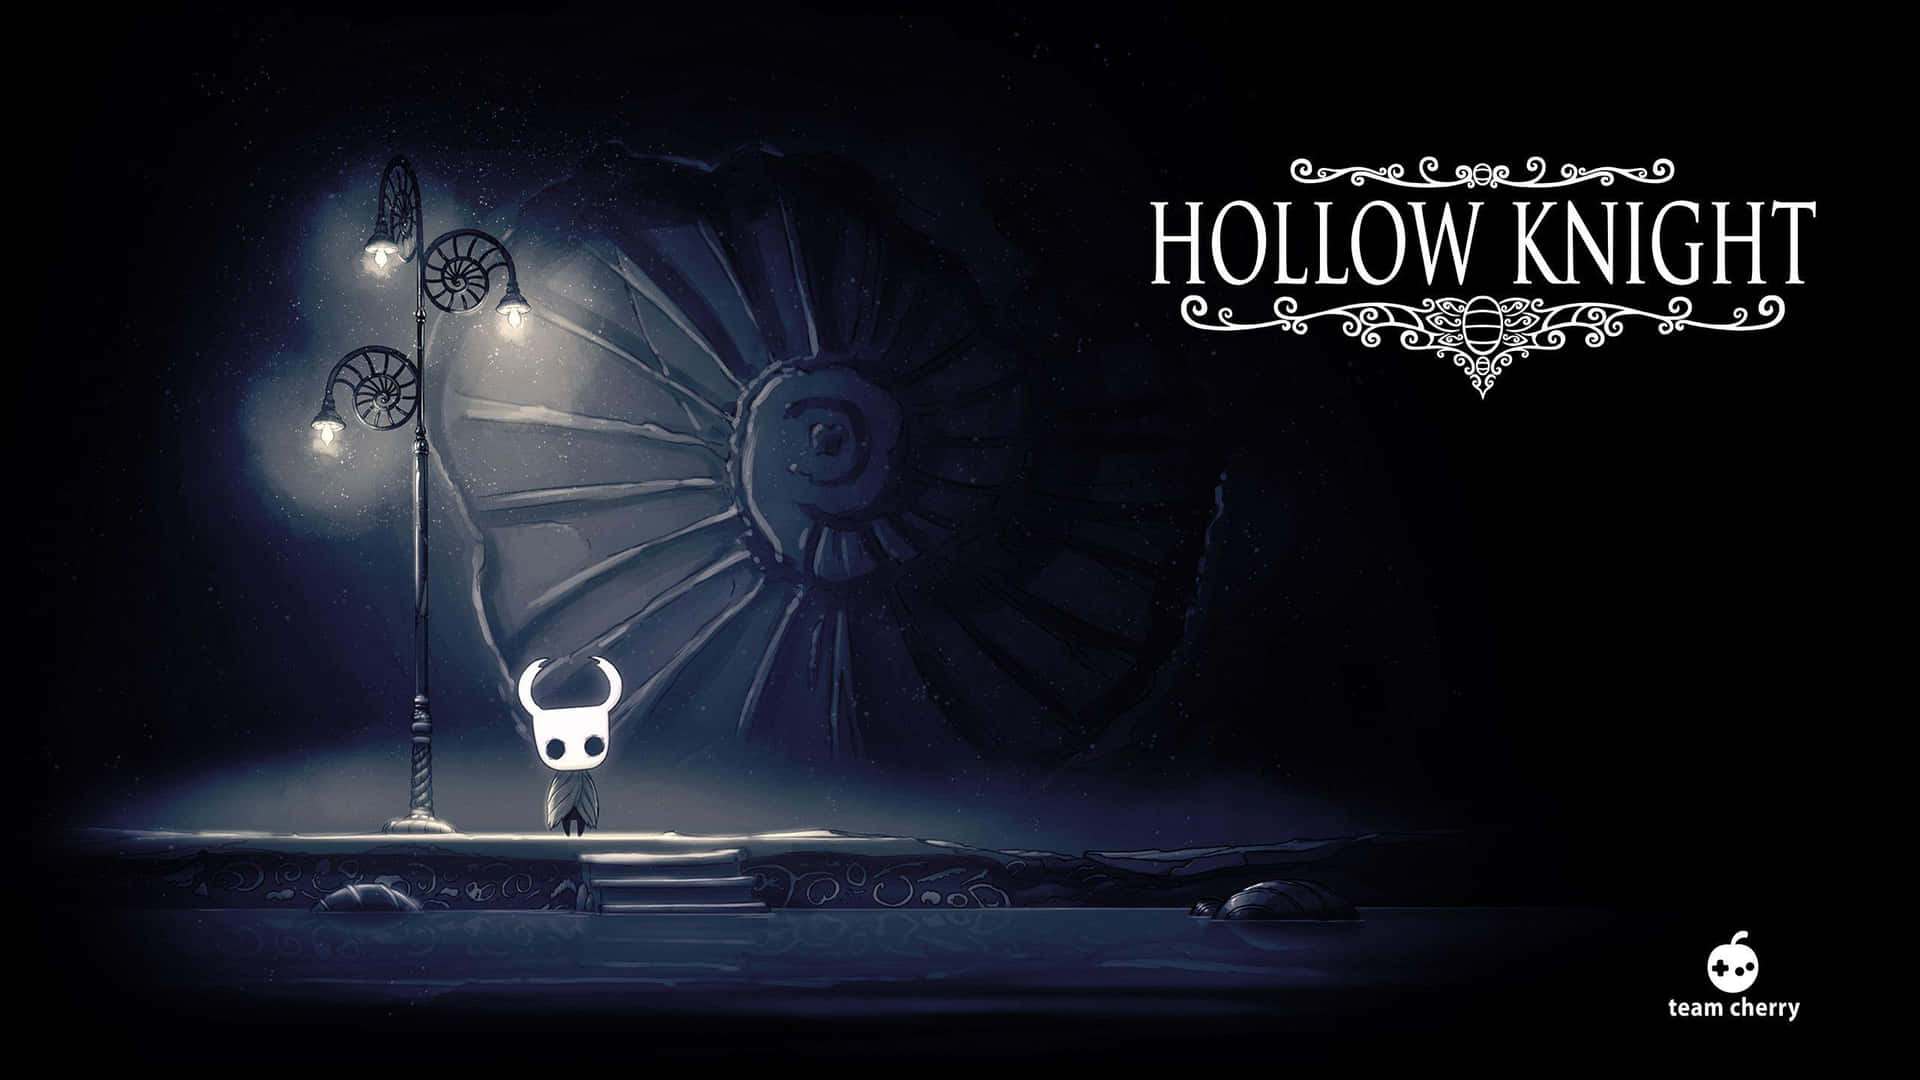 Join the adventure through Hollow Knight's world